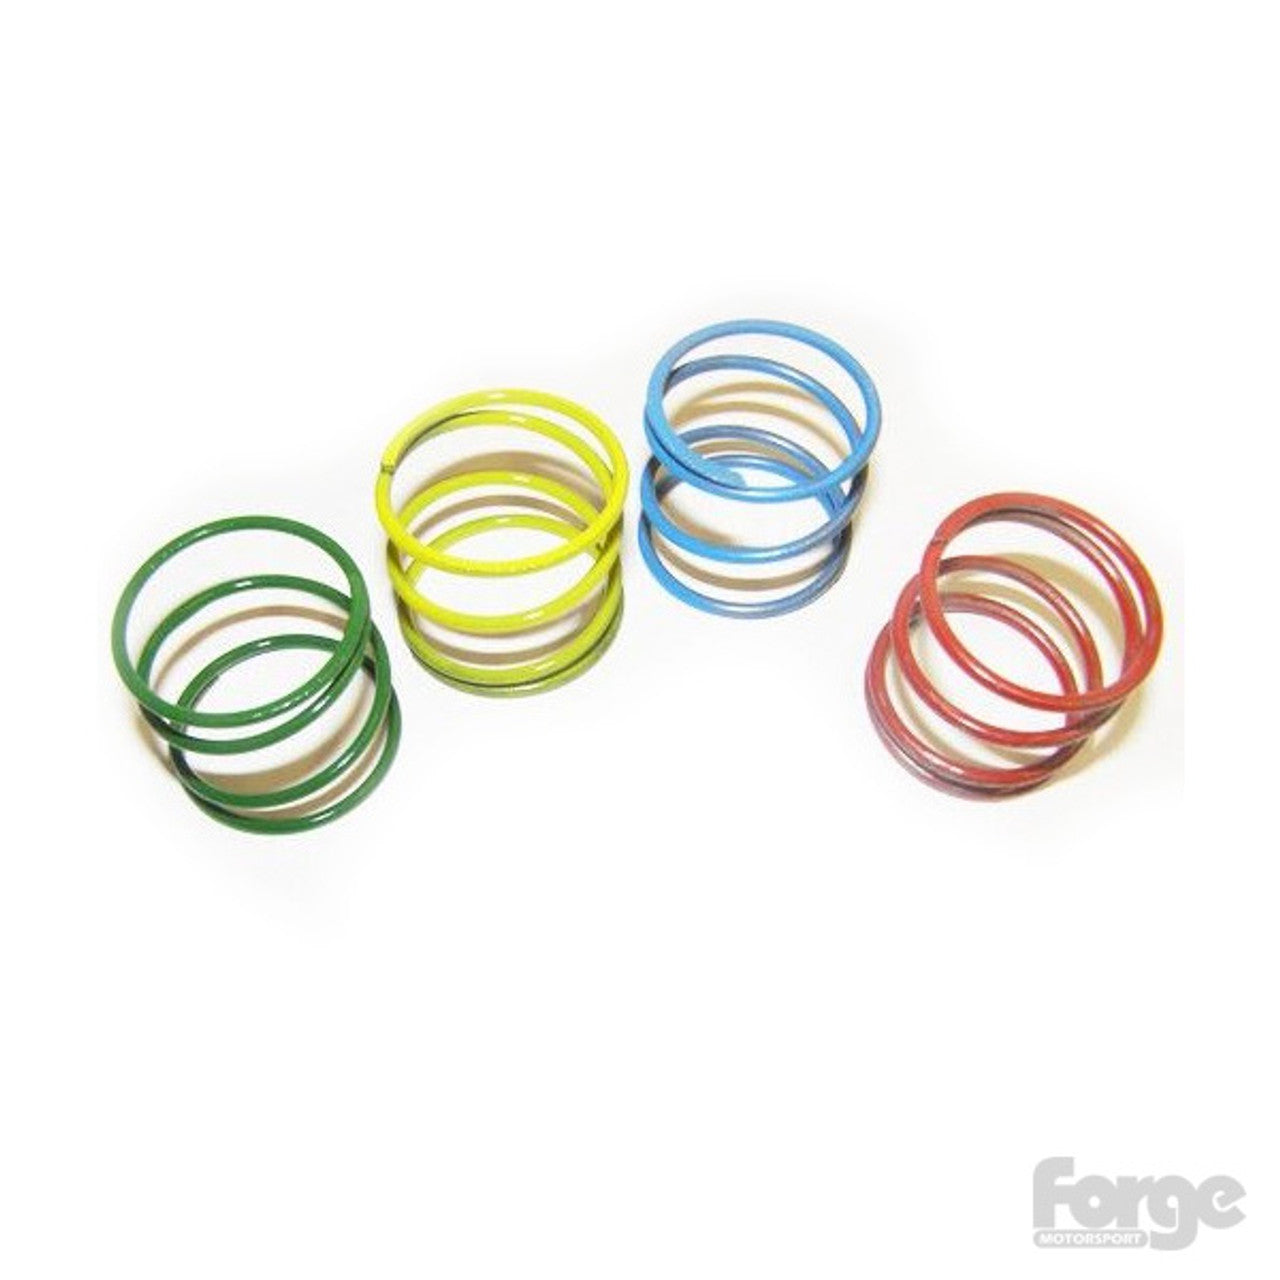 Forge Valve Small Spring 